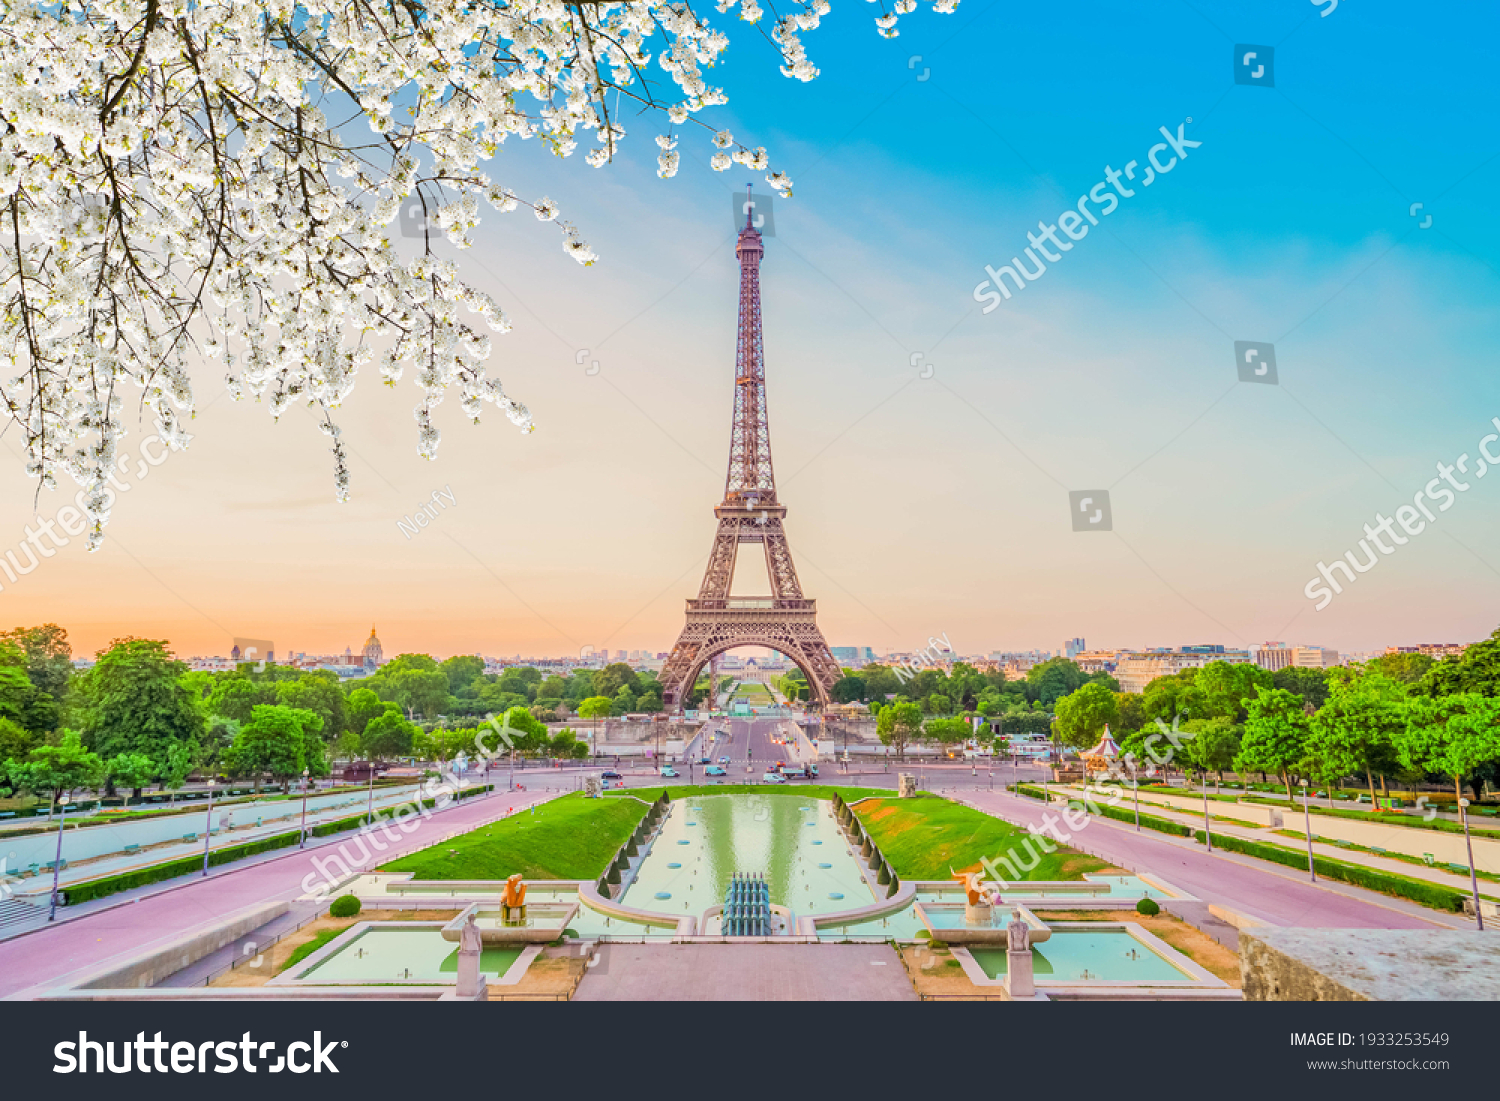 Paris Eiffel Tower and Trocadero garden at spring sunset in Paris, France. Eiffel Tower is one of the most famous landmarks of Paris., toned #1933253549